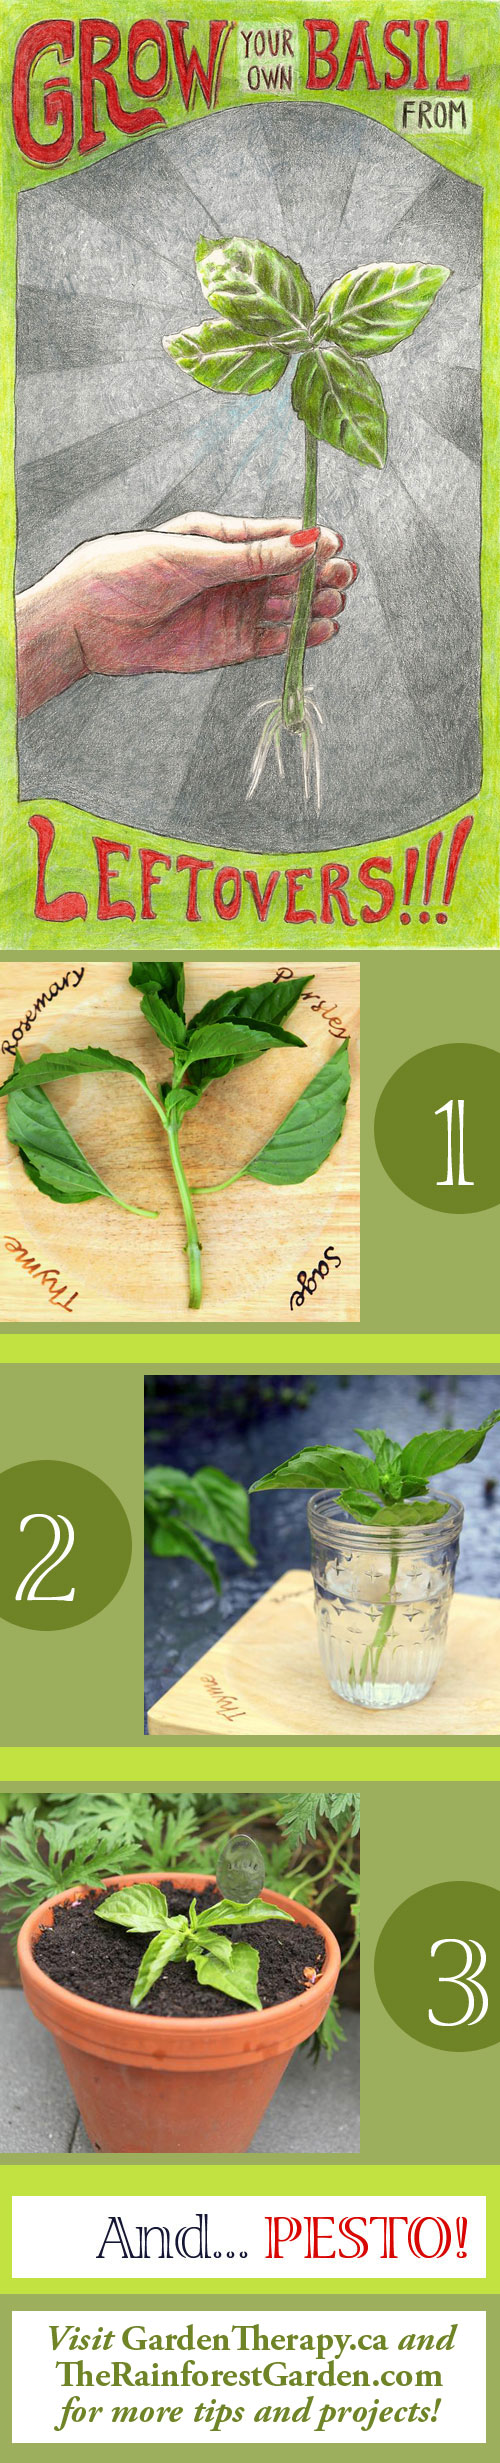 How to Grow Basil from Cuttings